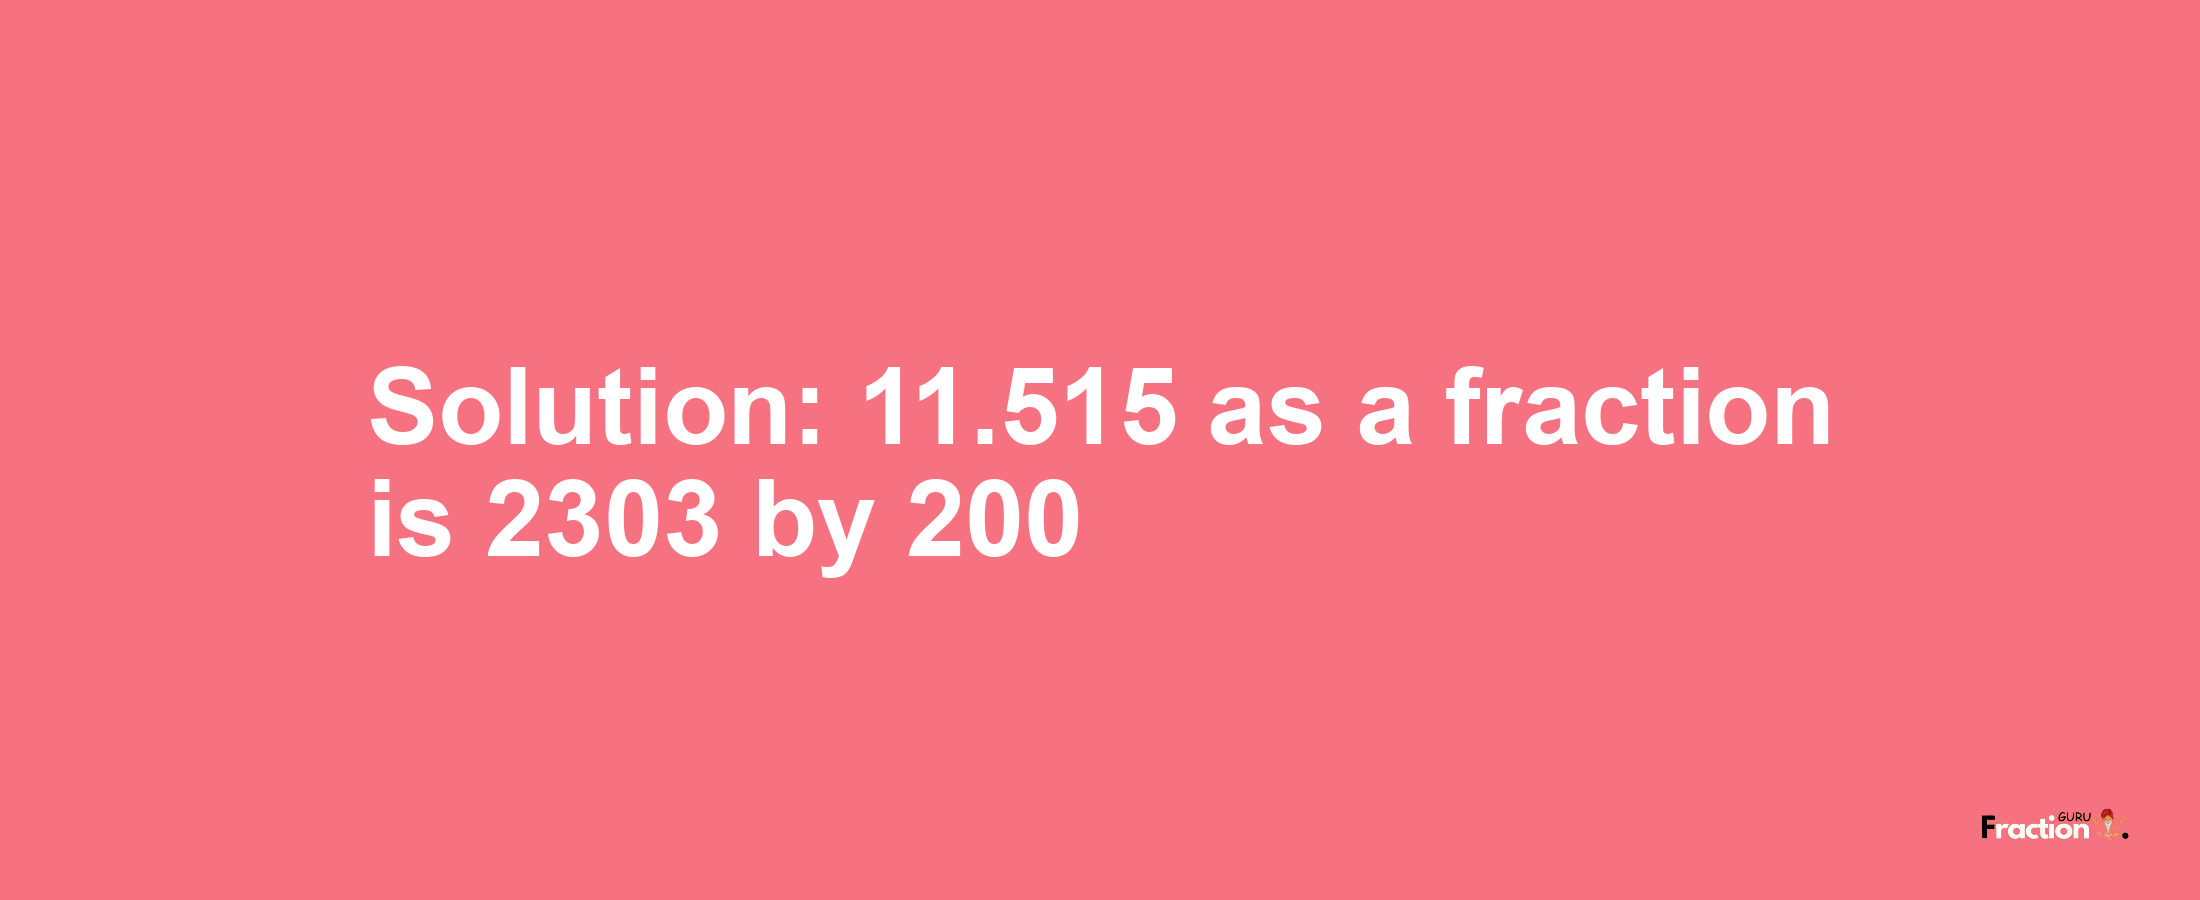 Solution:11.515 as a fraction is 2303/200